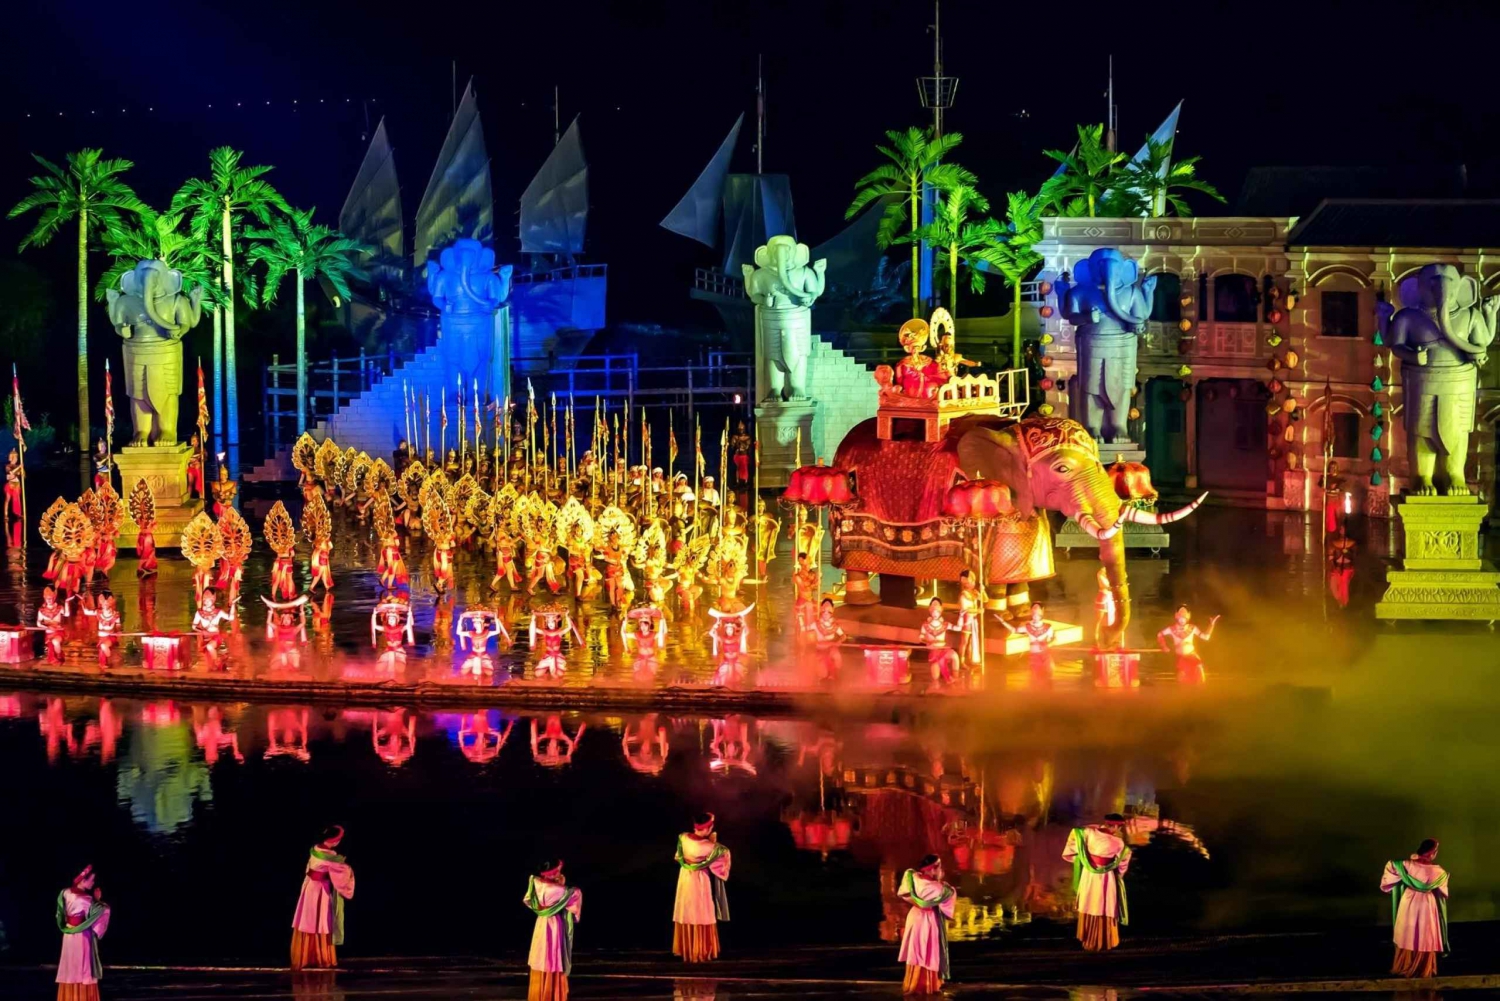 Hoi An: Hoi An Memories Land Entry Ticket with Show: Hoi An Memories Land Entry Ticket with Show